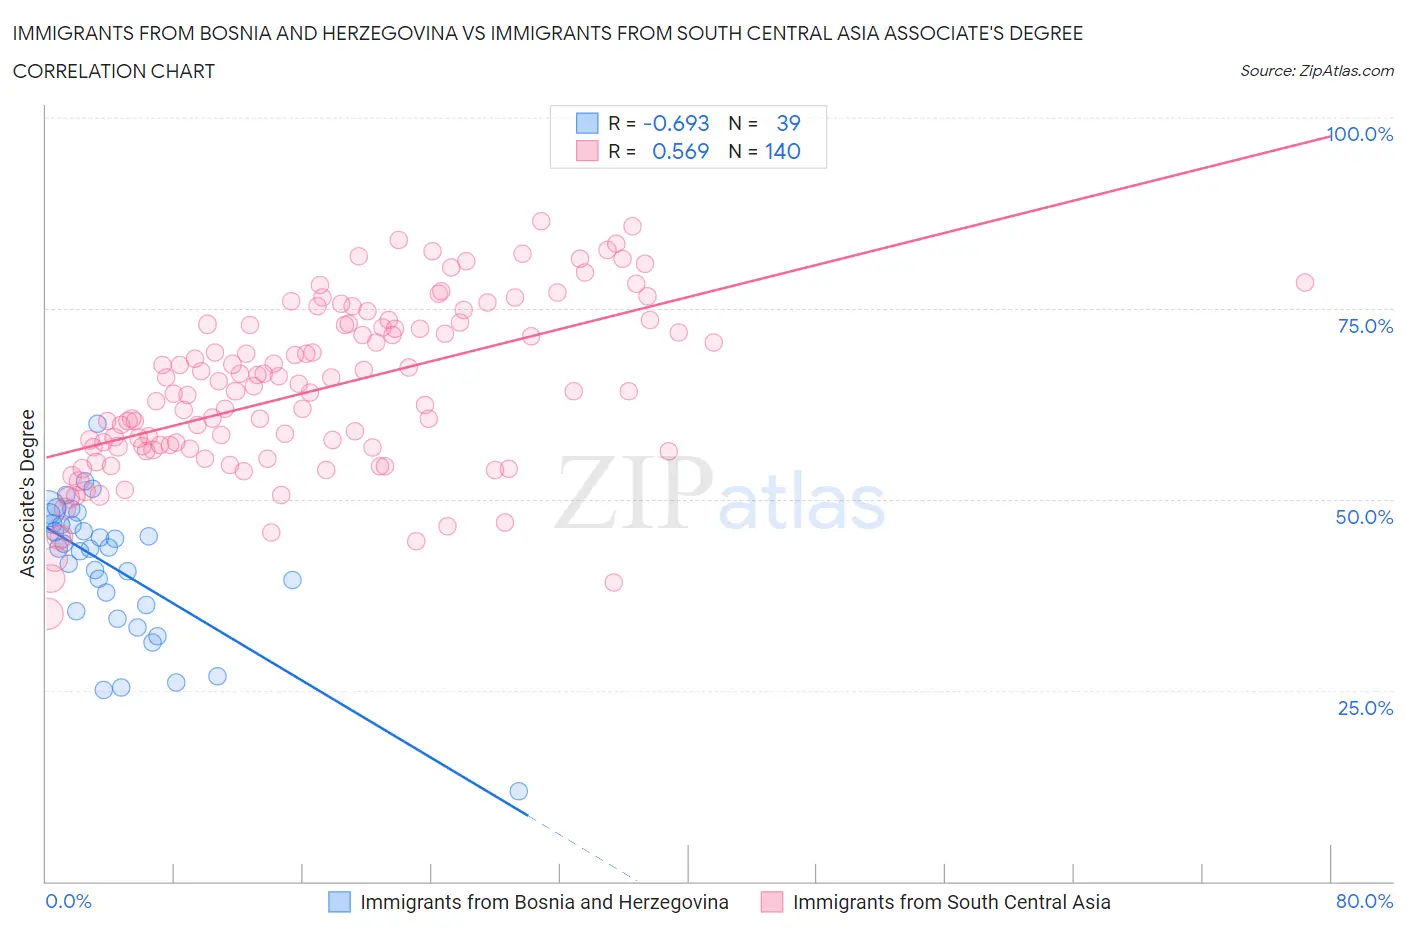 Immigrants from Bosnia and Herzegovina vs Immigrants from South Central Asia Associate's Degree